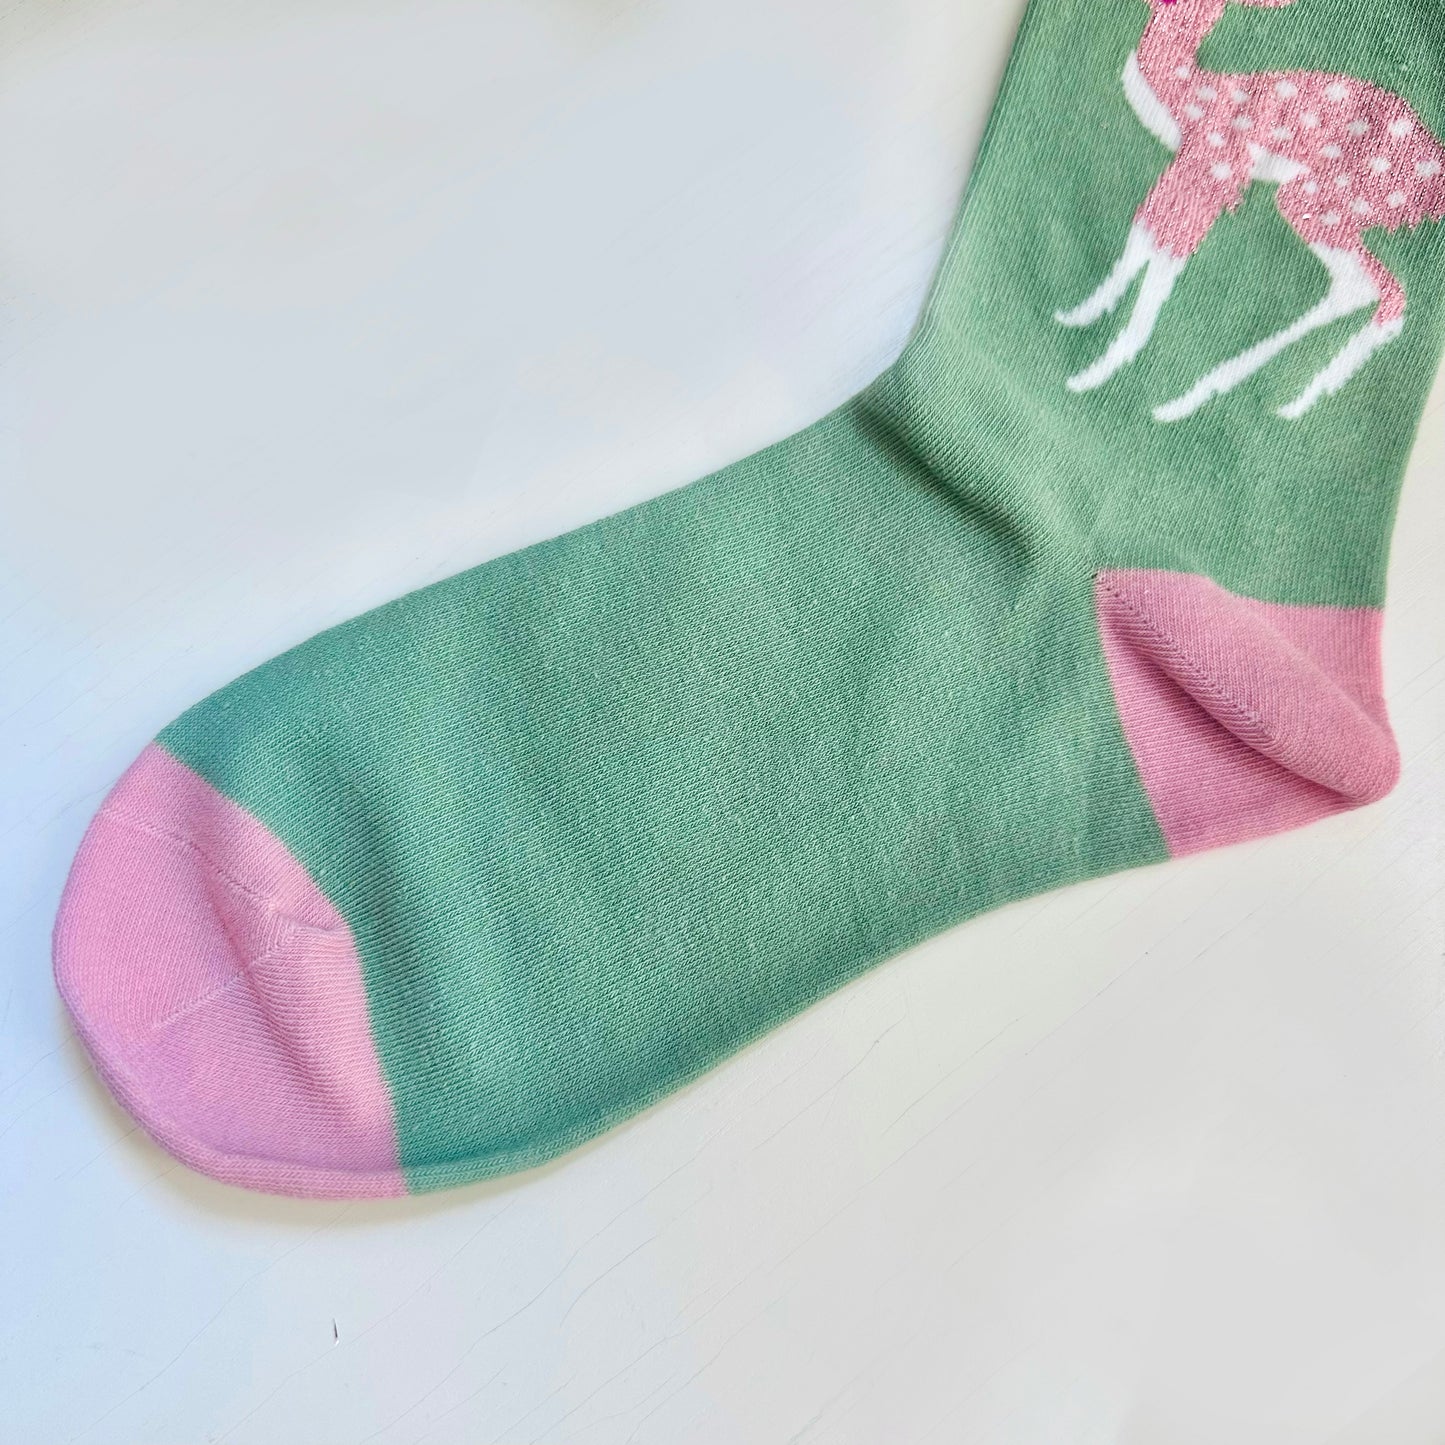 A green and pink sock with a deer on it.